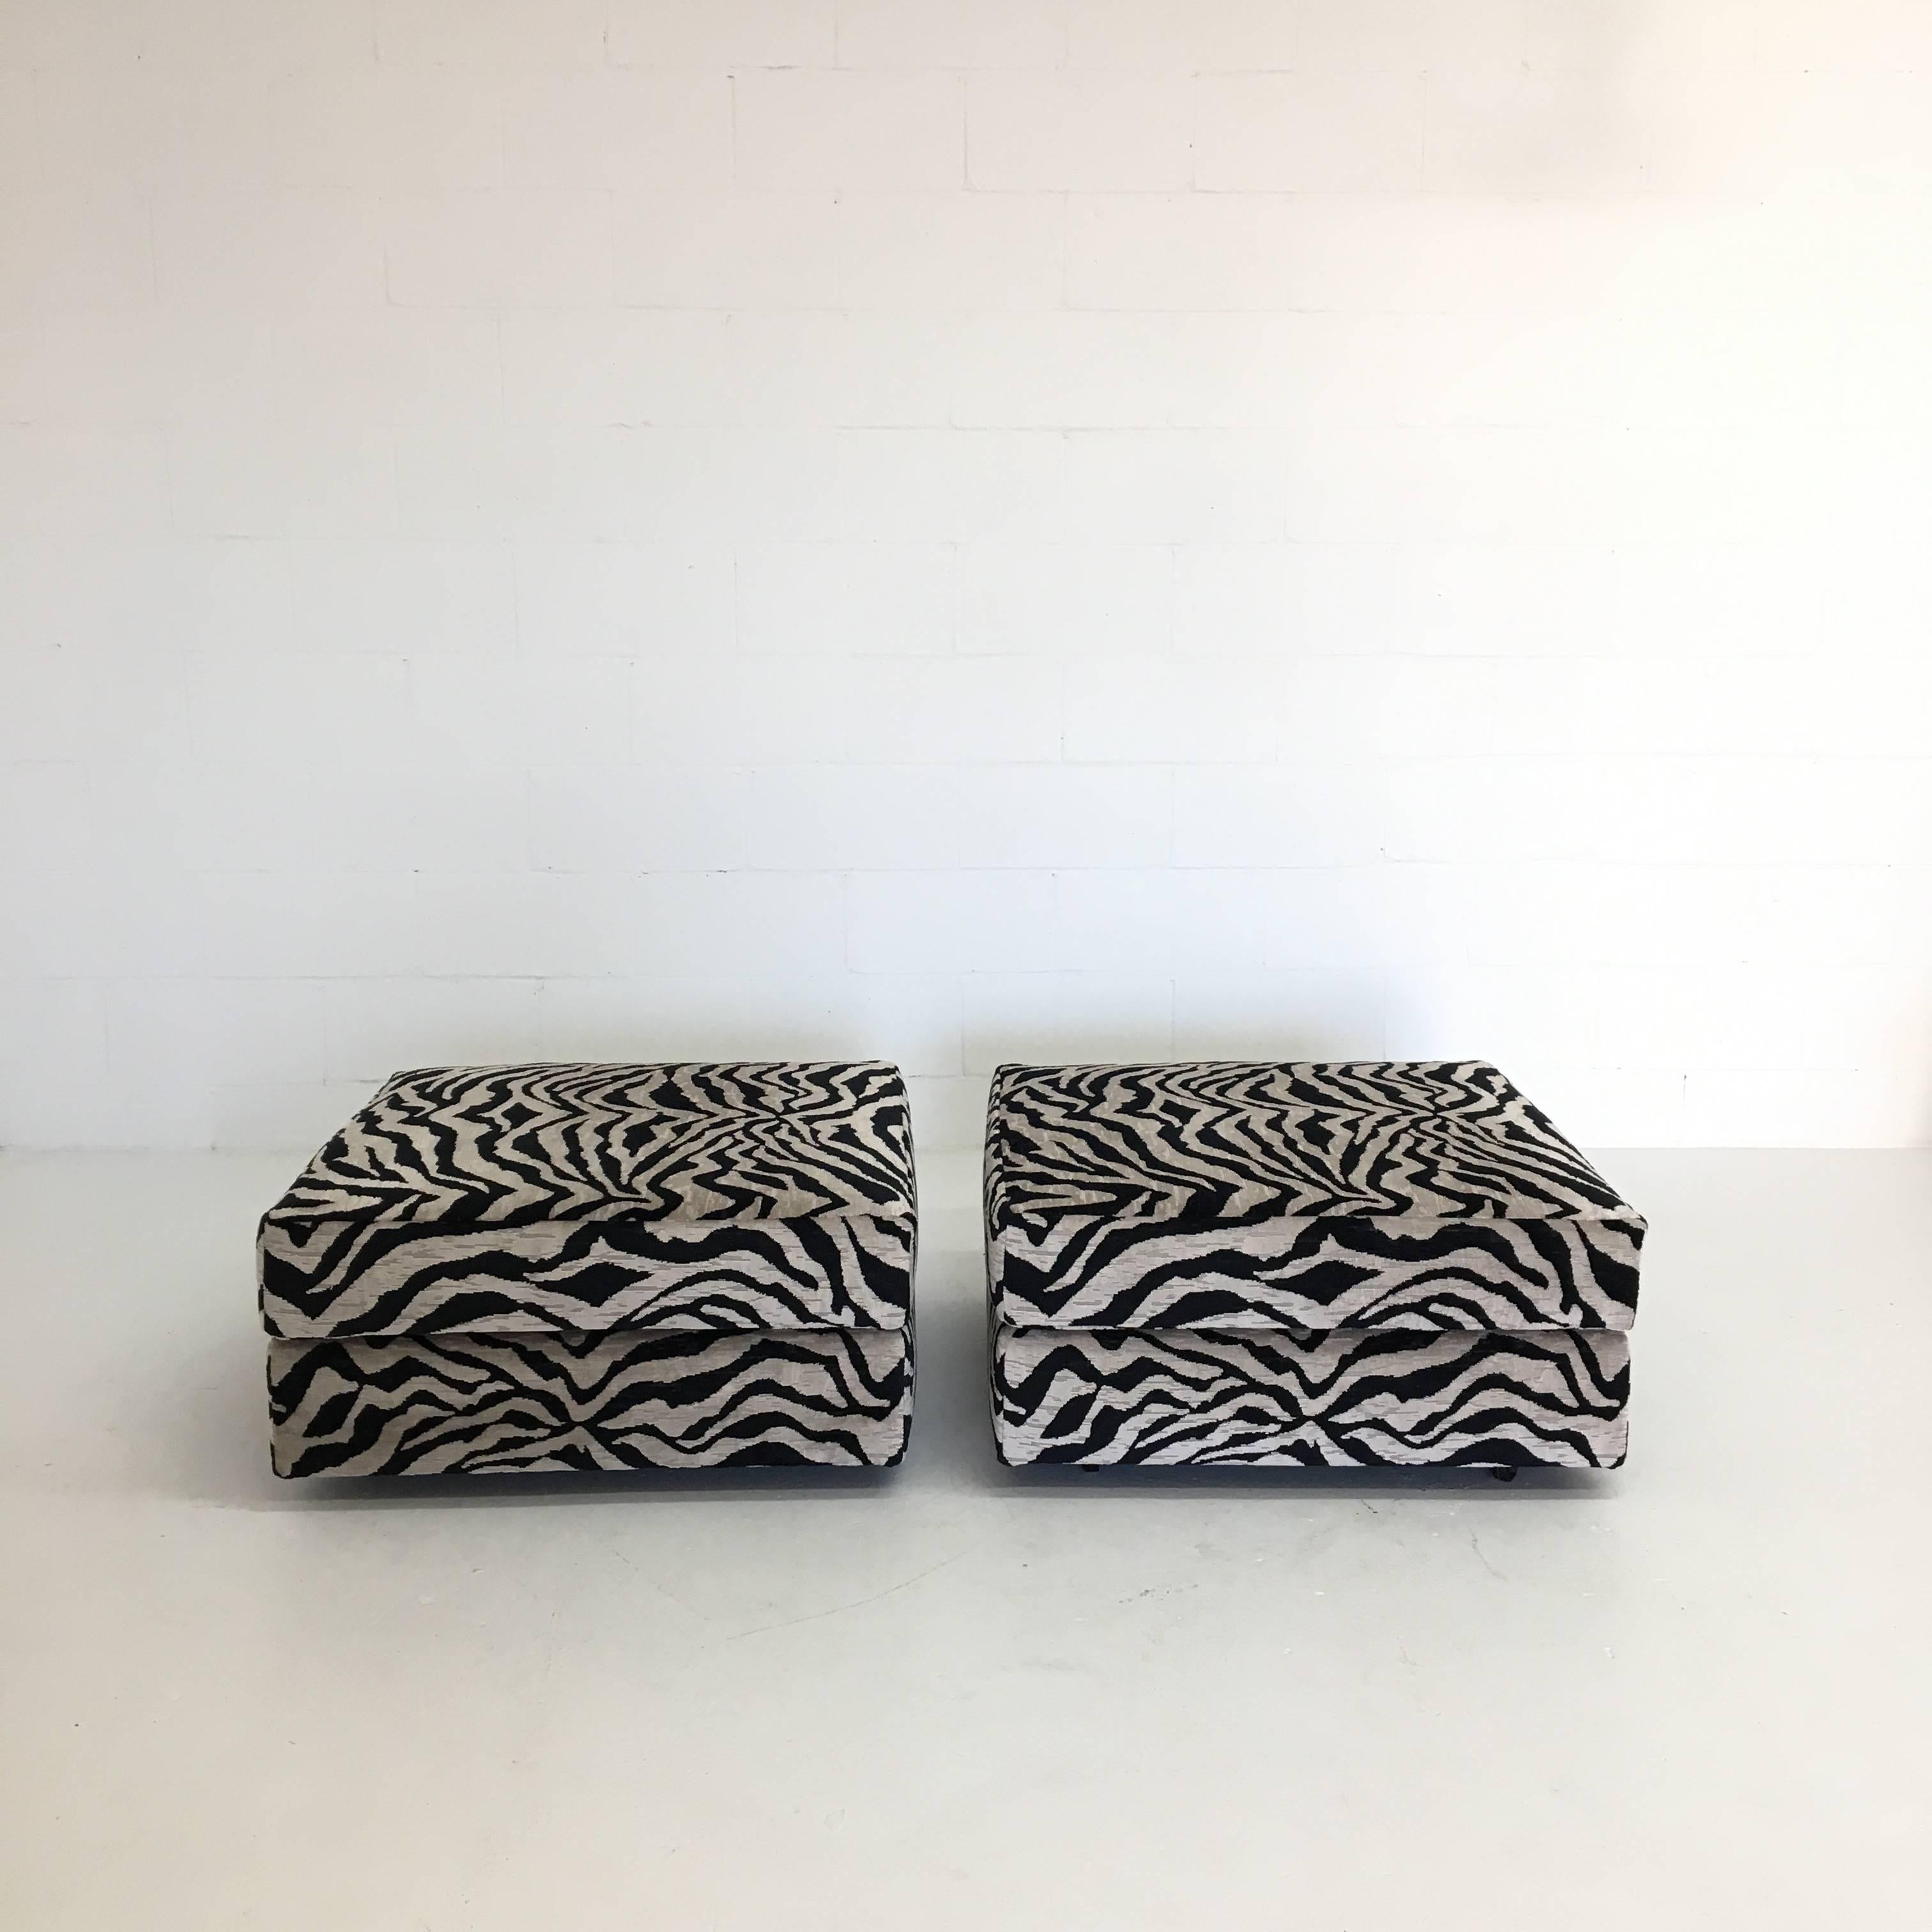 20th Century Pair of Large Square Ottomans in Zebra